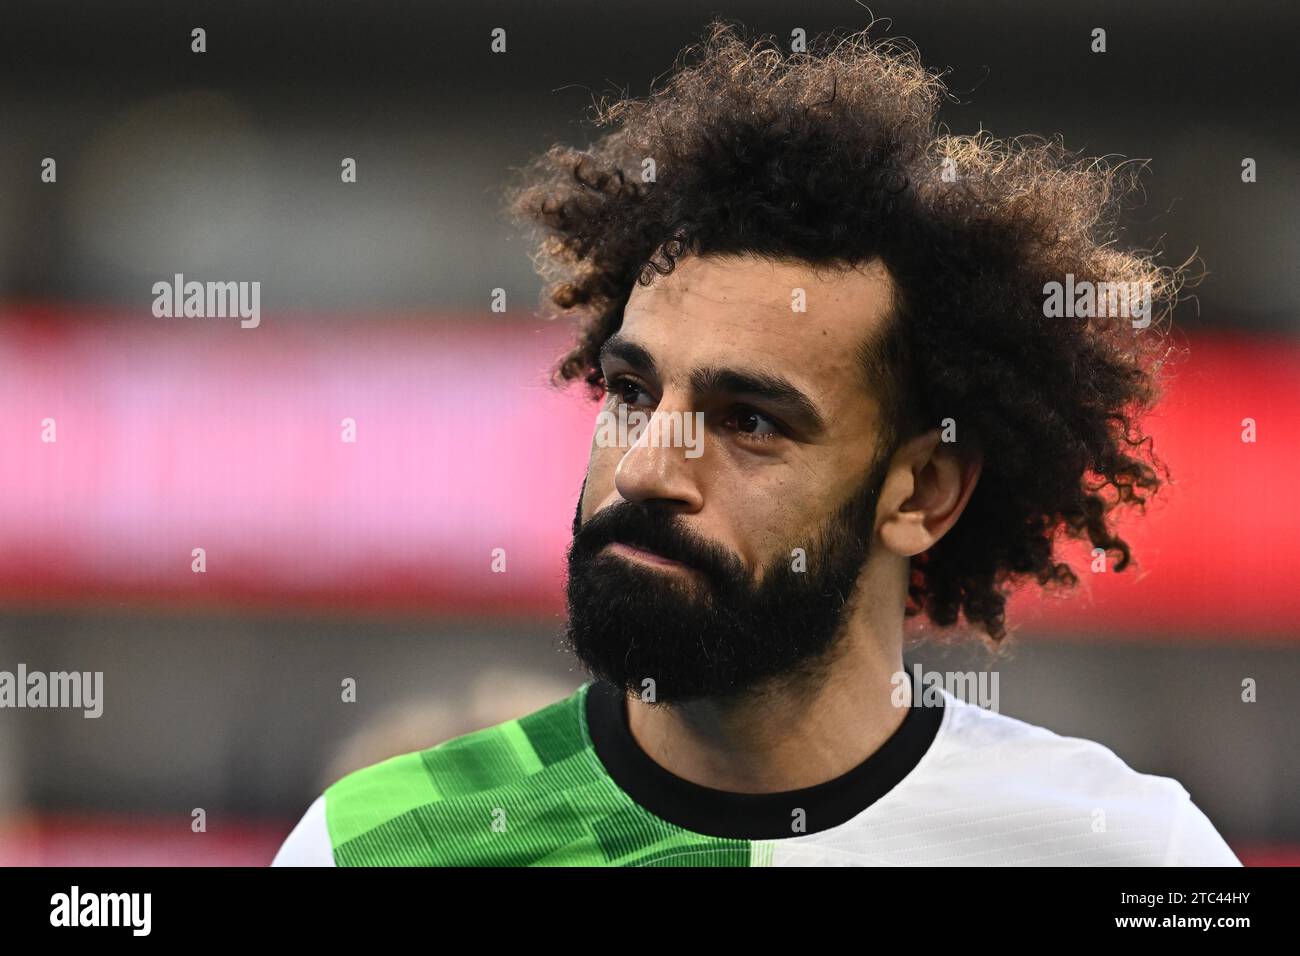 LONDON, ENGLAND - DECEMBER 9: Mohamed Salah of Liverpool FC looks on during the Premier League match between Crystal Palace and Liverpool FC at Selhur Stock Photo